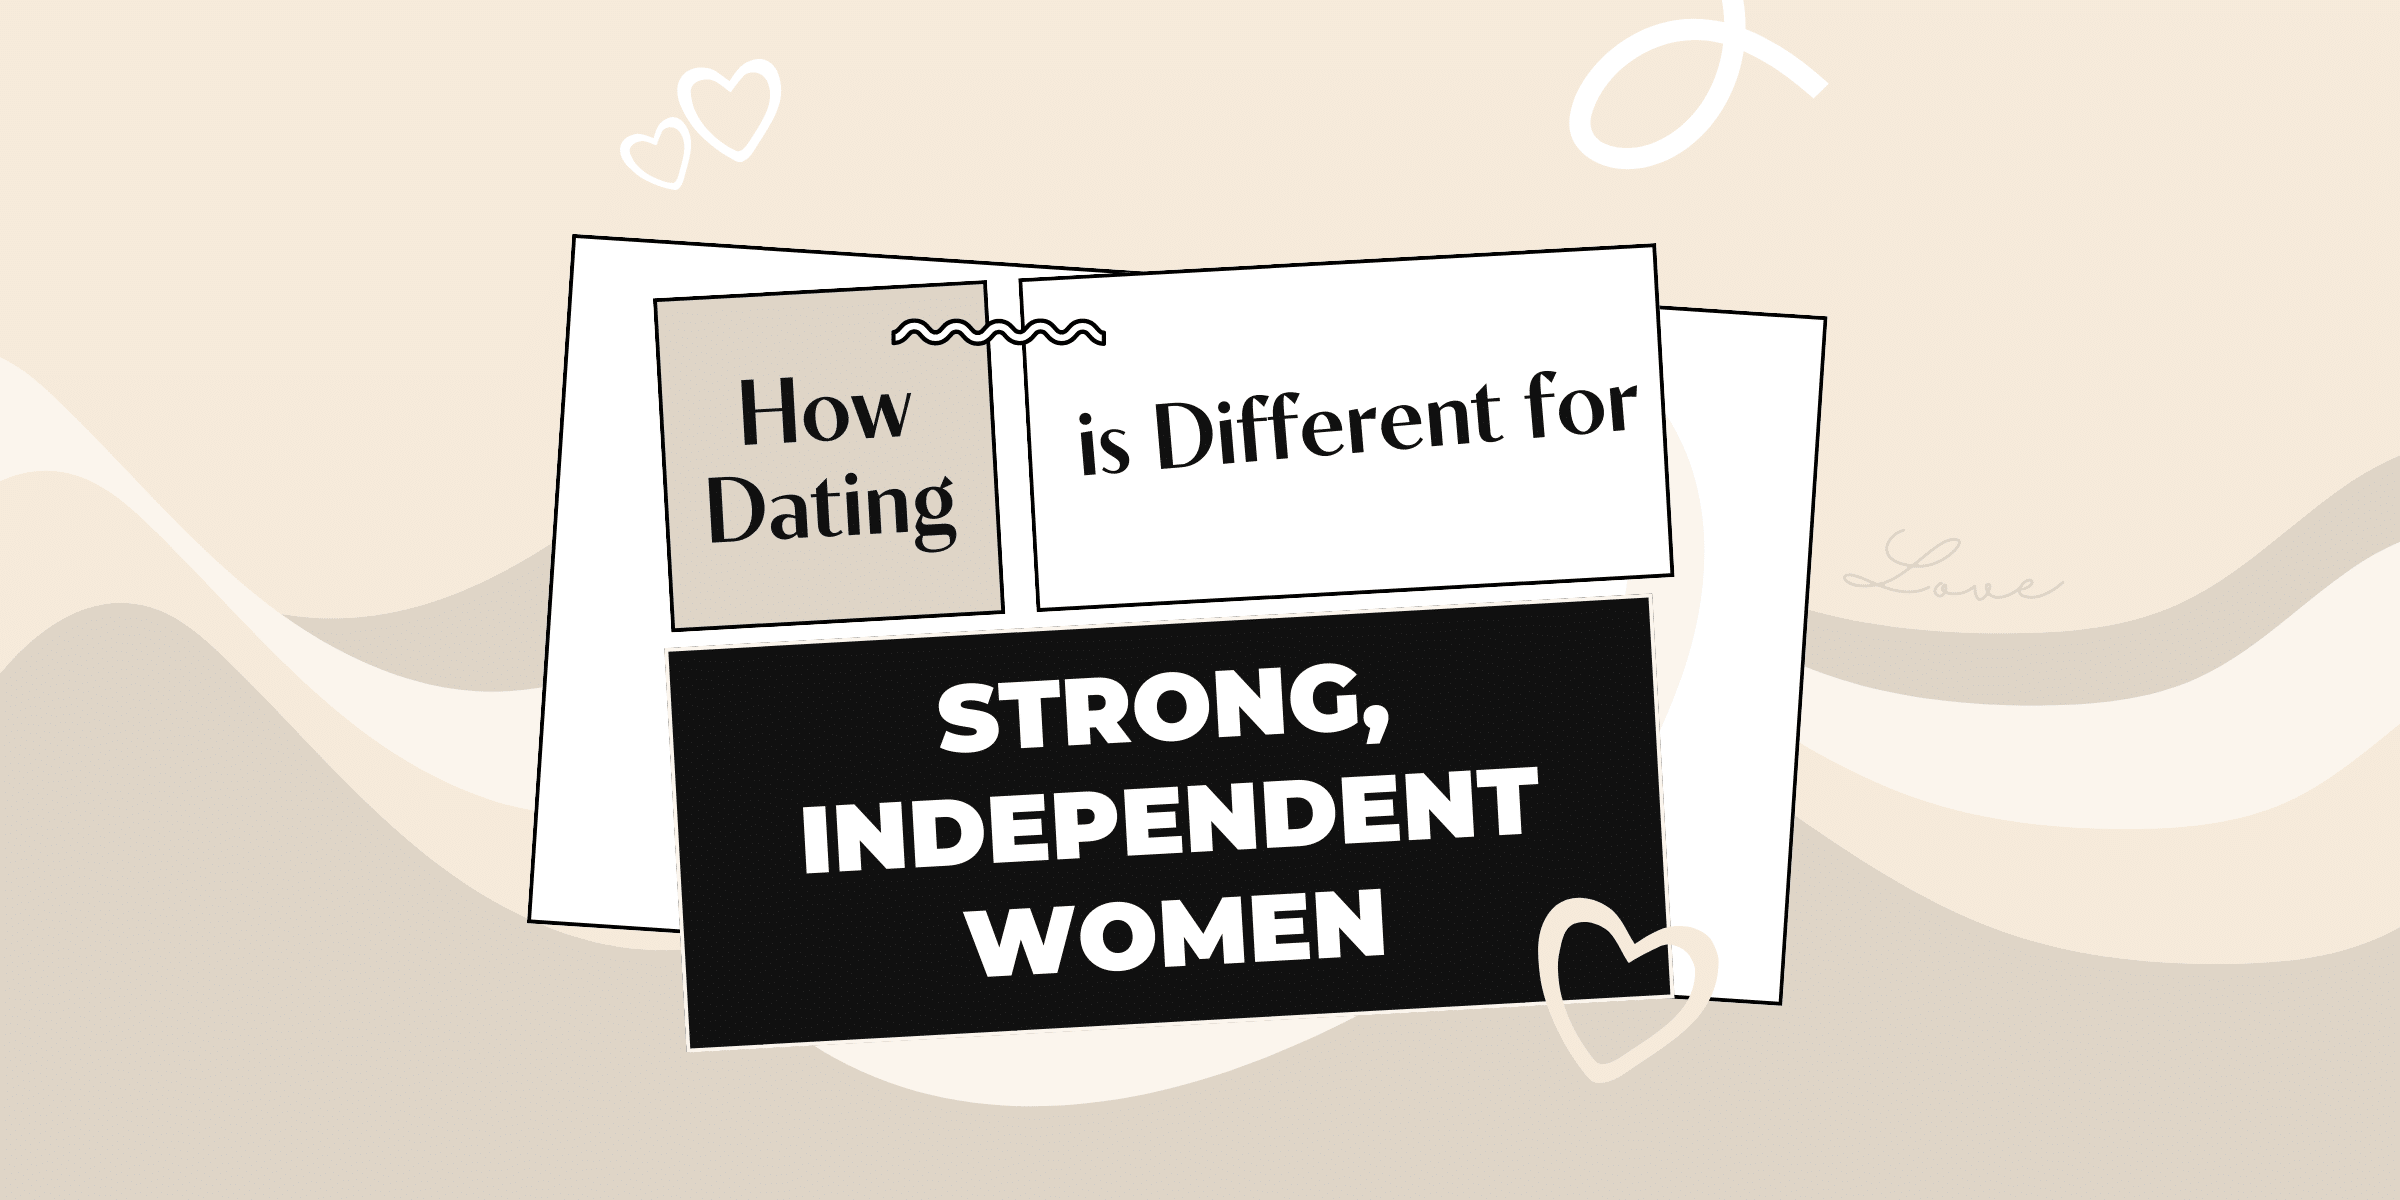 Dating a strong, independent woman? Follow our guide to learn what to expect and how to approach a relationship with her.